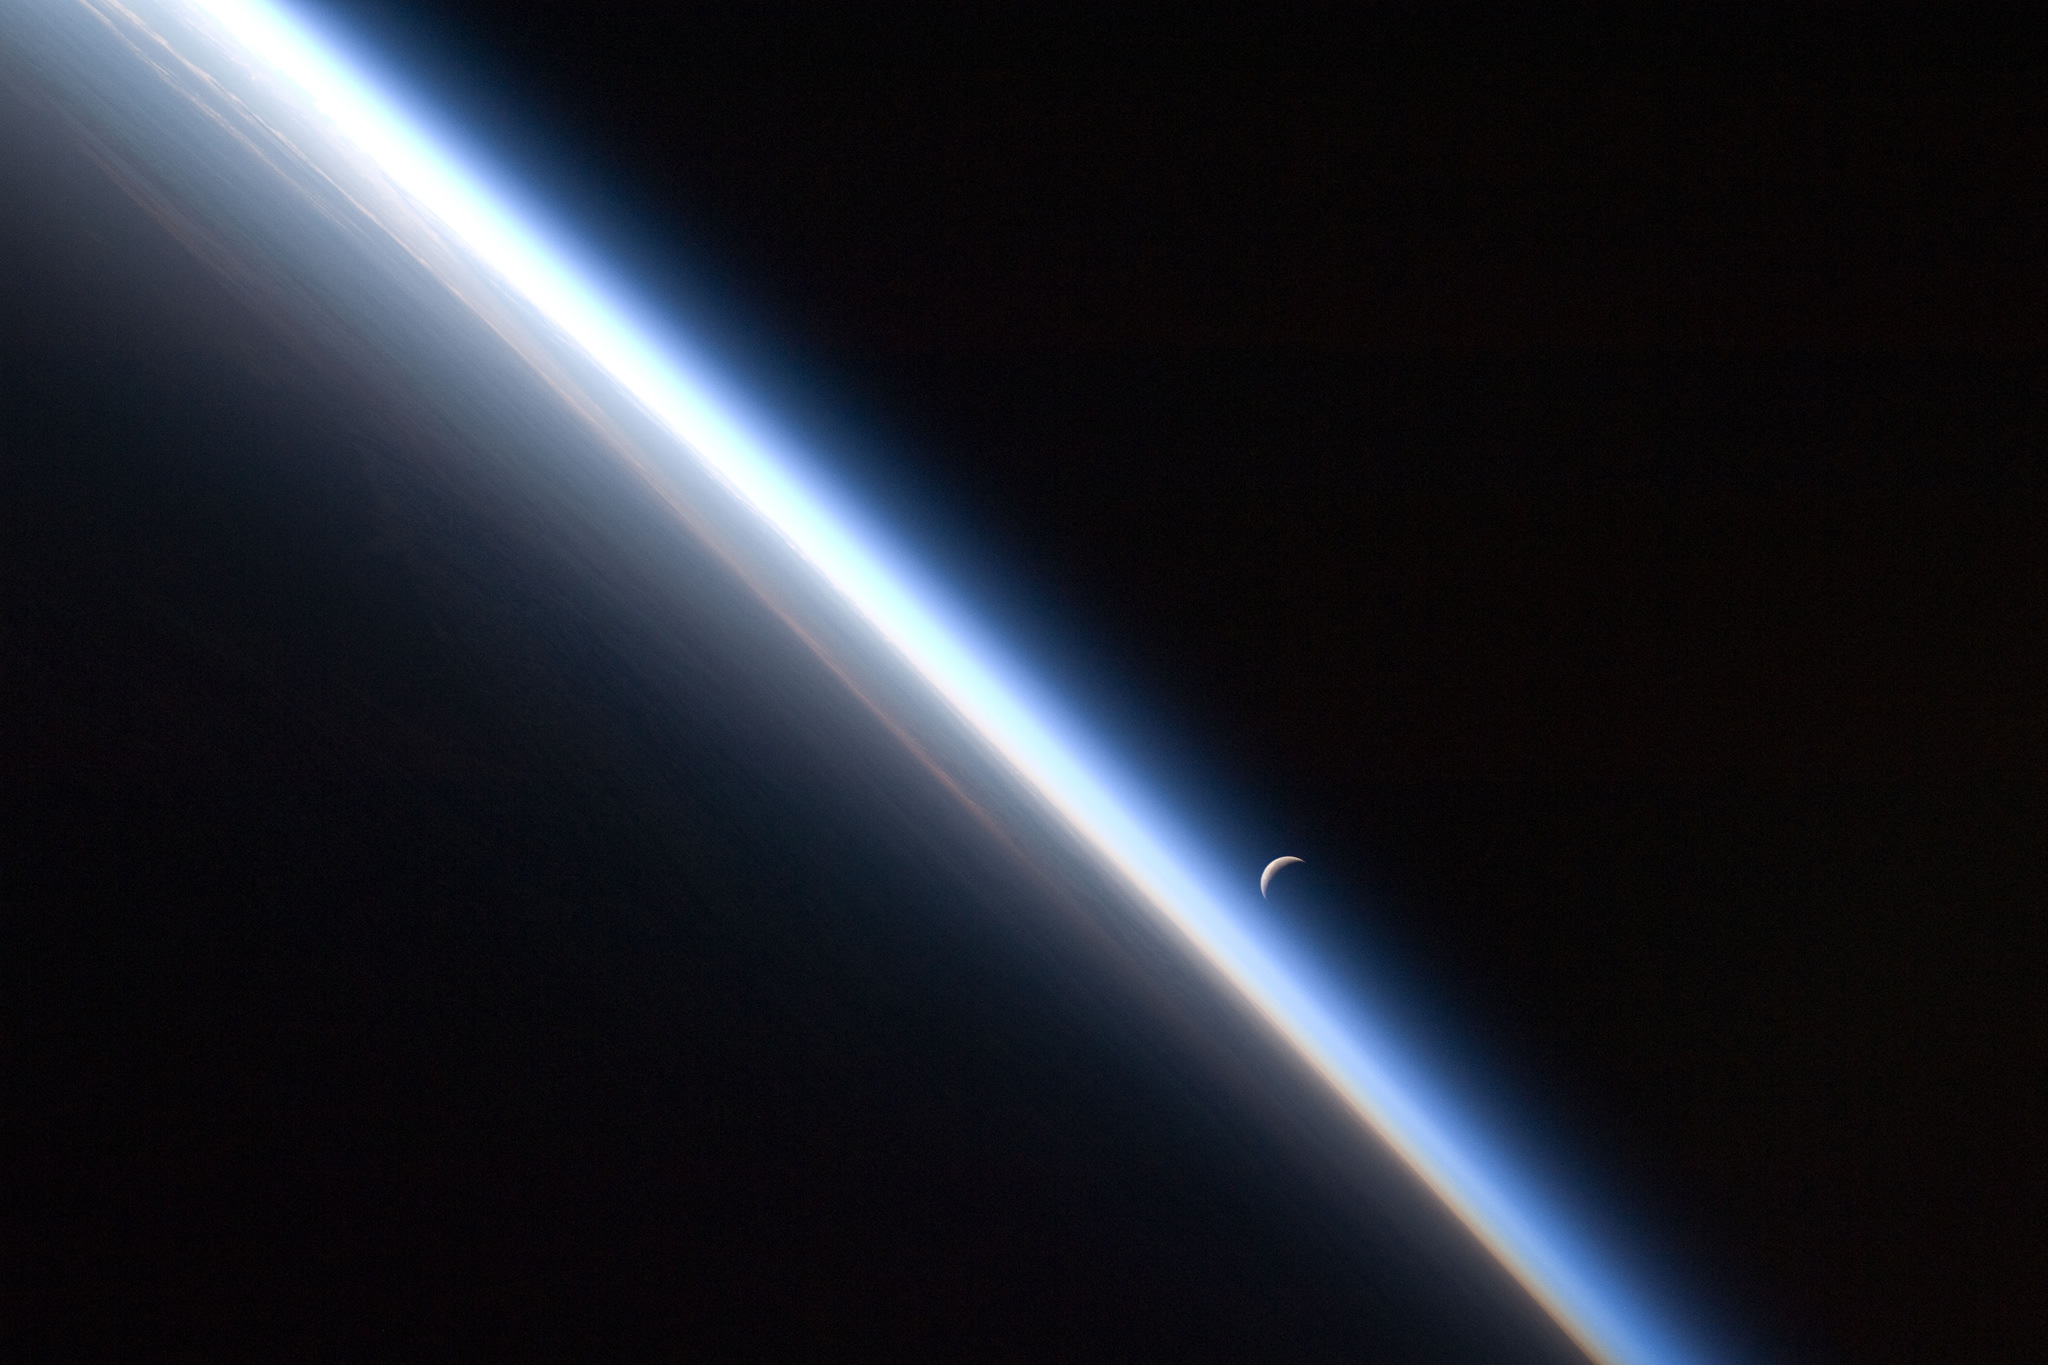 A crescent Moon rises against the edge of Earth